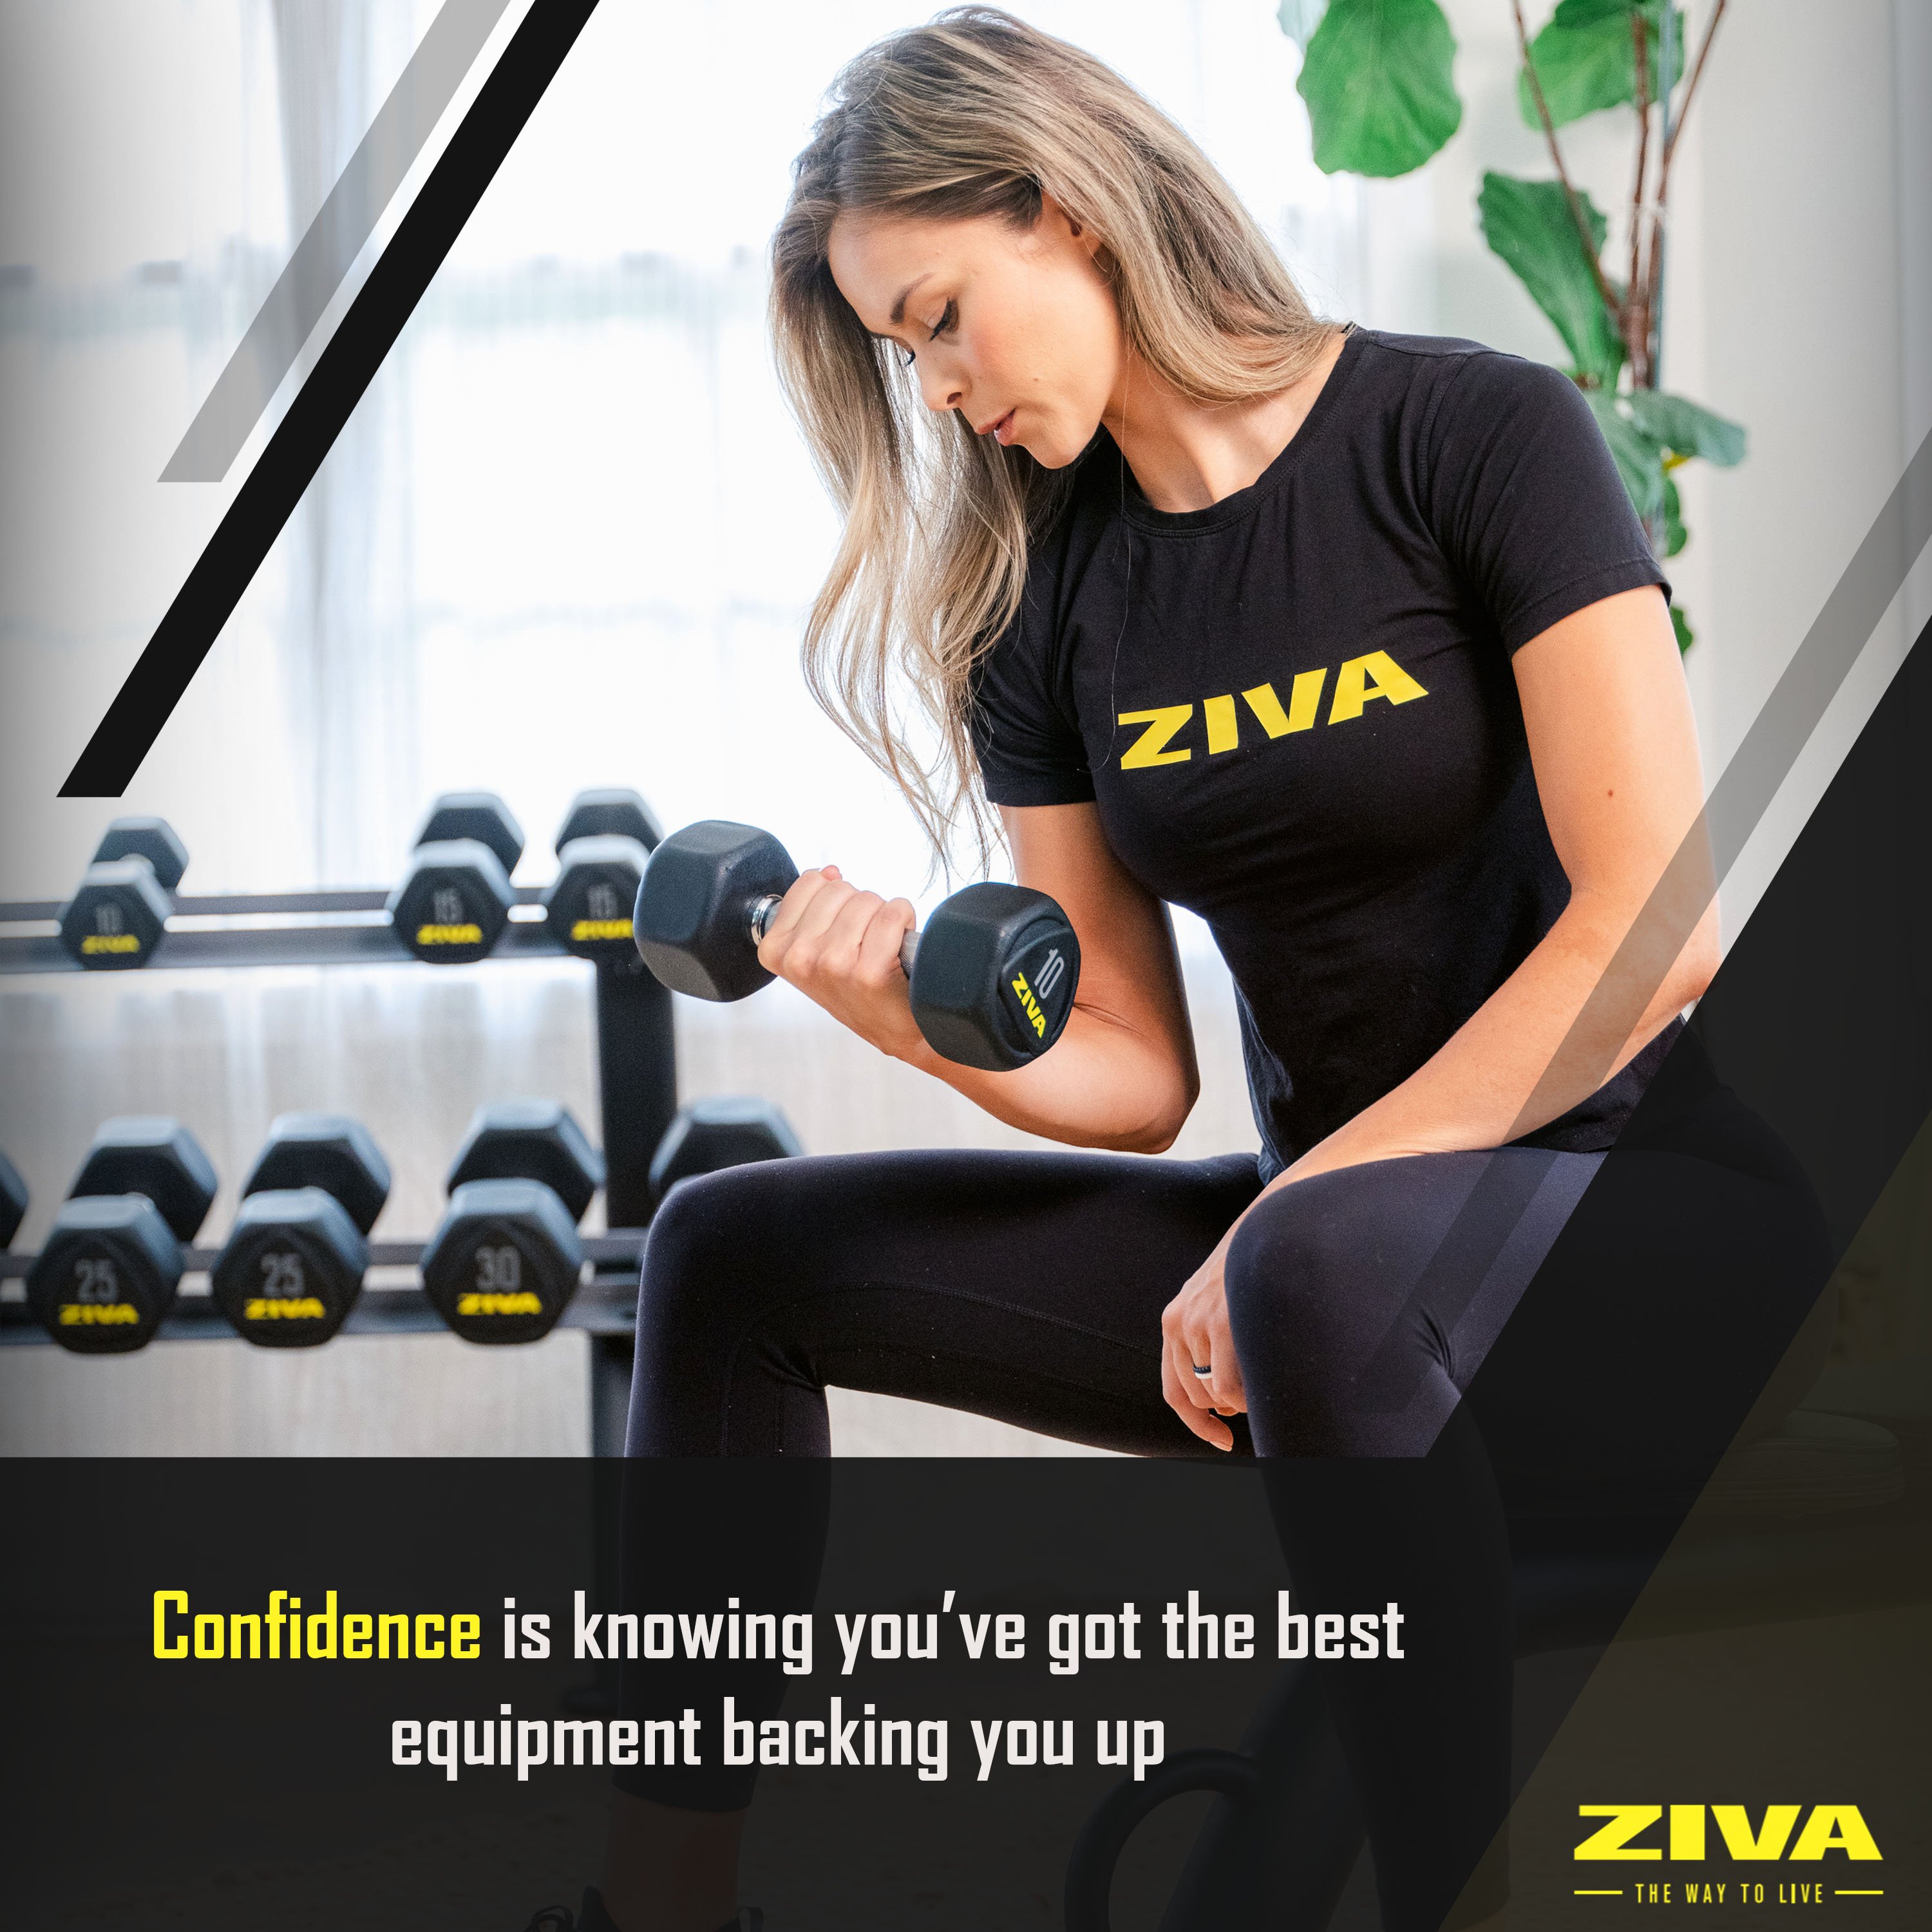 Confidence is knowing you have got the best equipment backing you up.